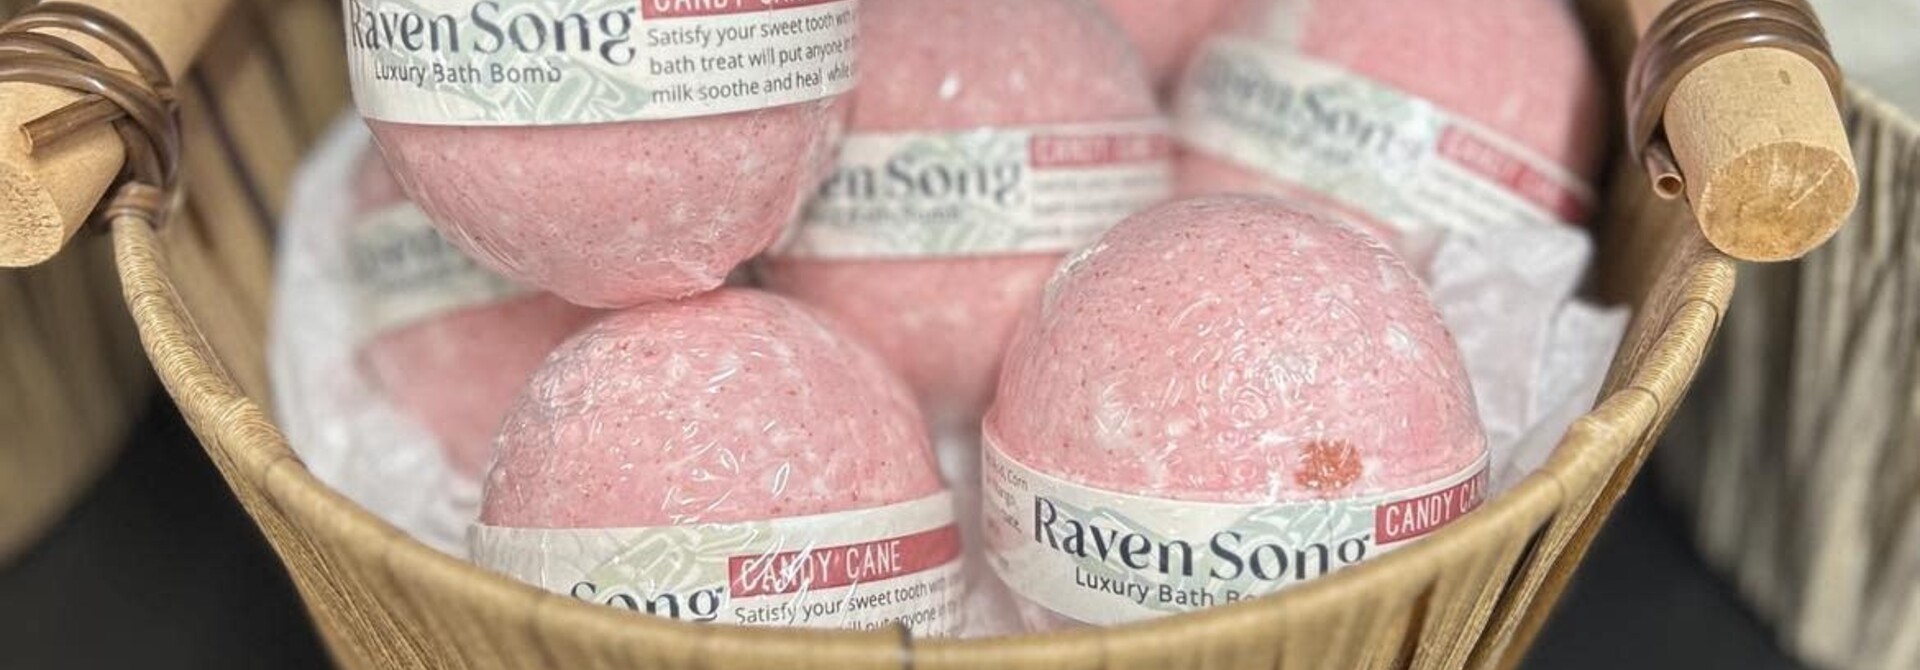 Raven Song Luxury Bath Bomb - Candy Cane Ribbons